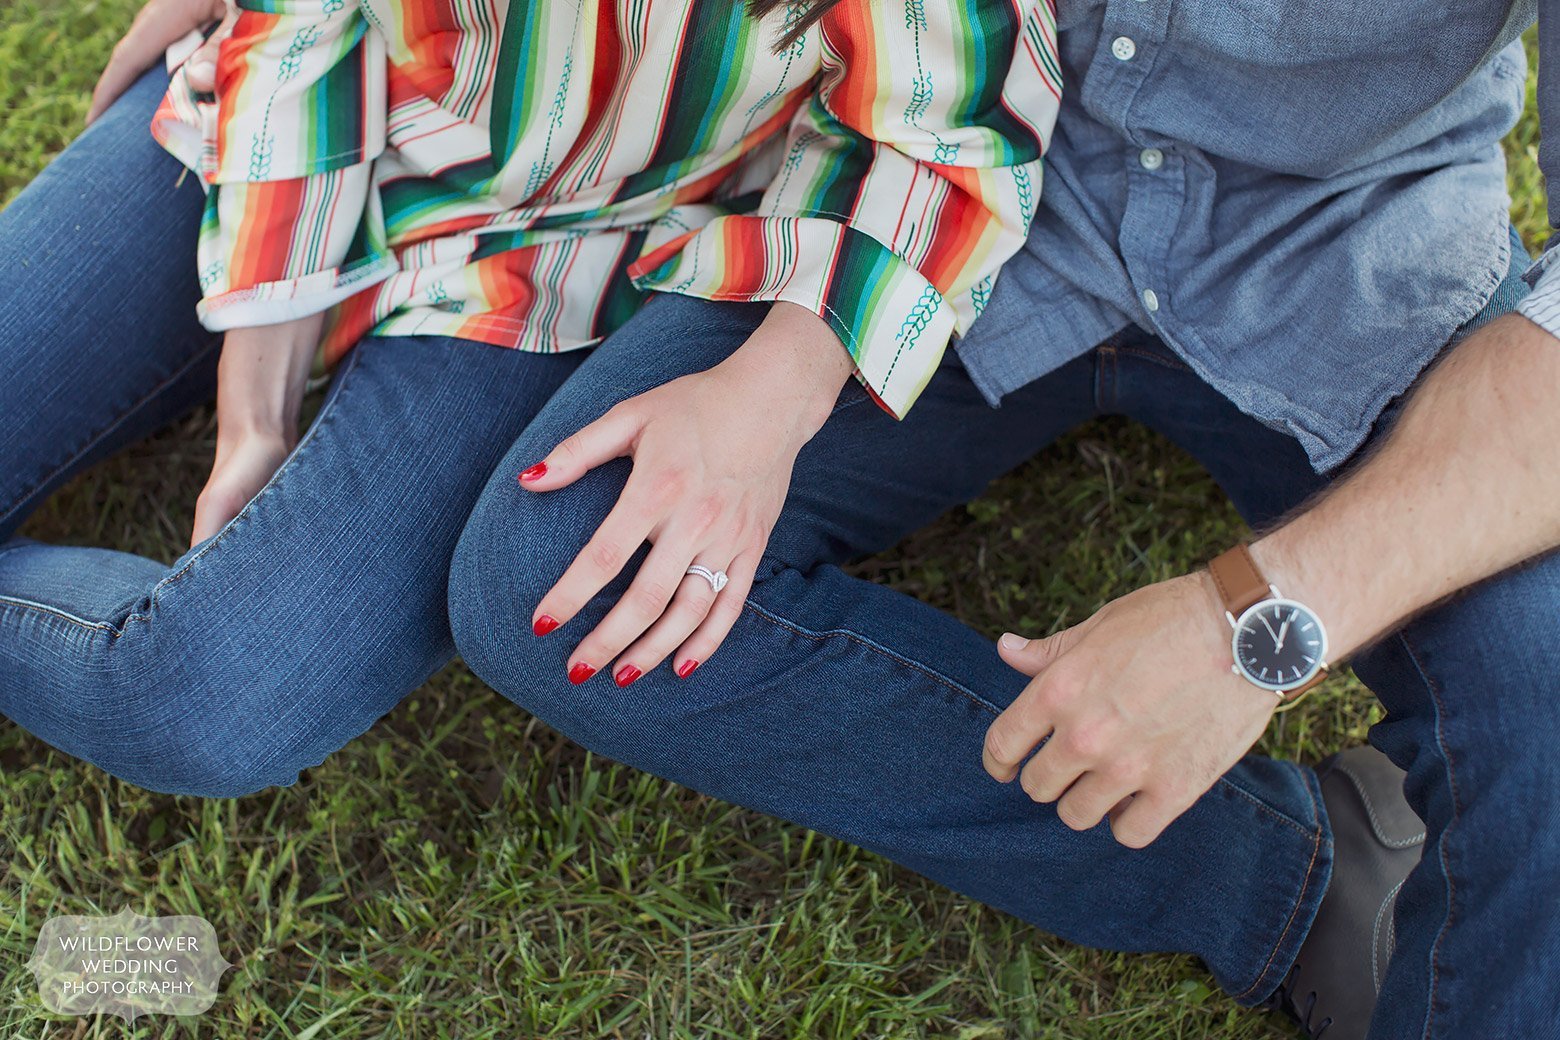 The couple wears a colorful outfit for their engagement session in the country in MO.